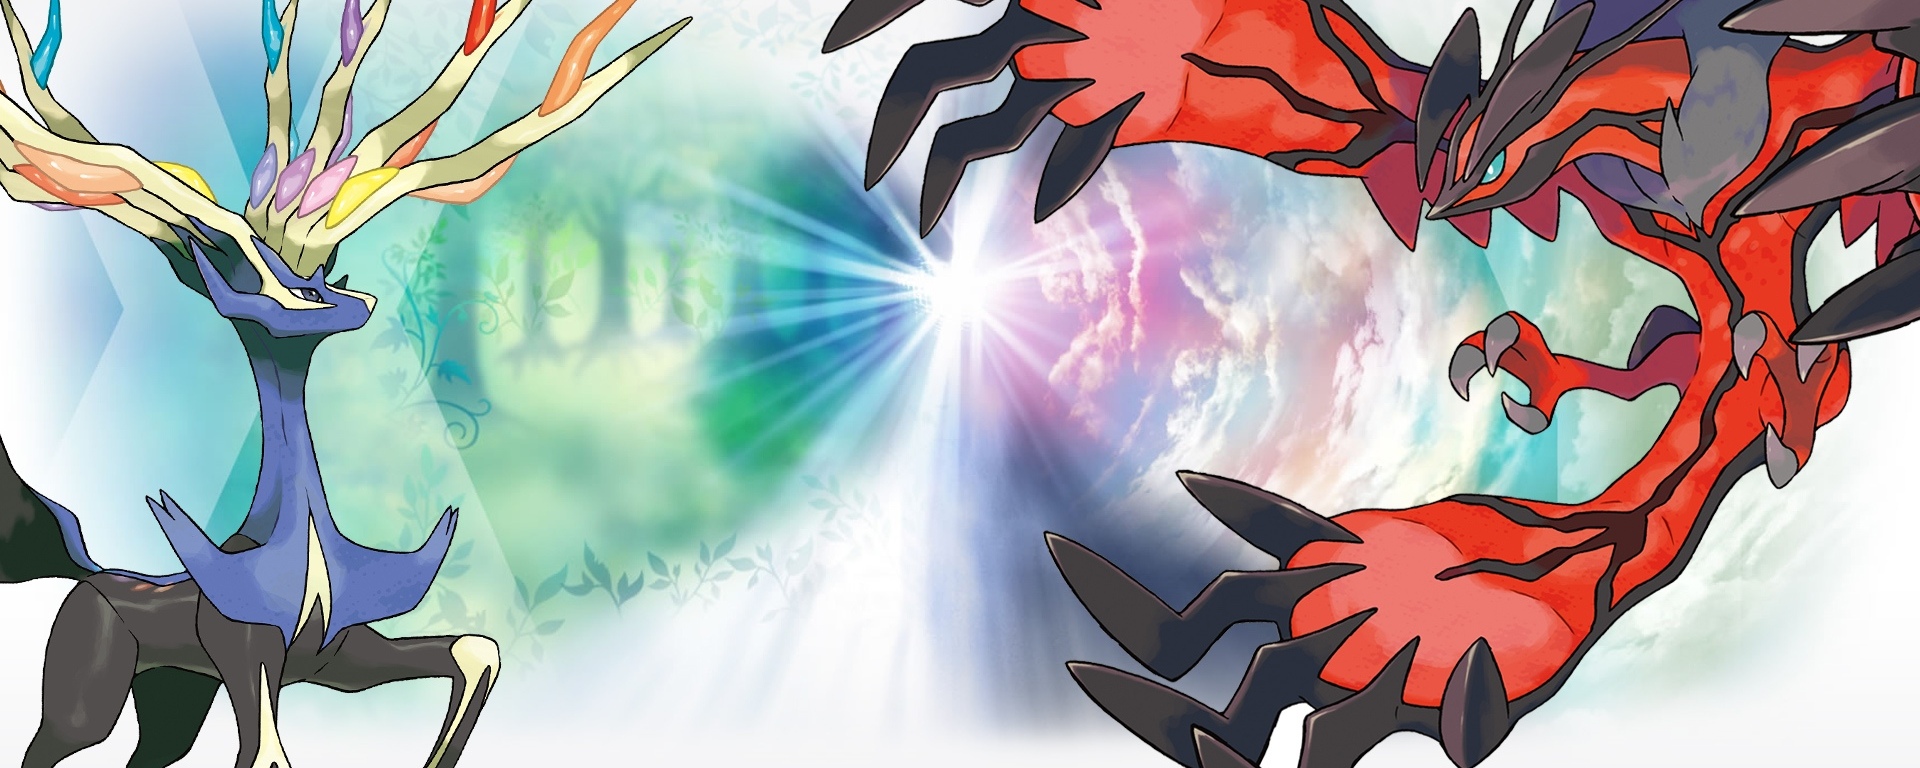 A new perspective: How Pokémon X and Y refreshes the series